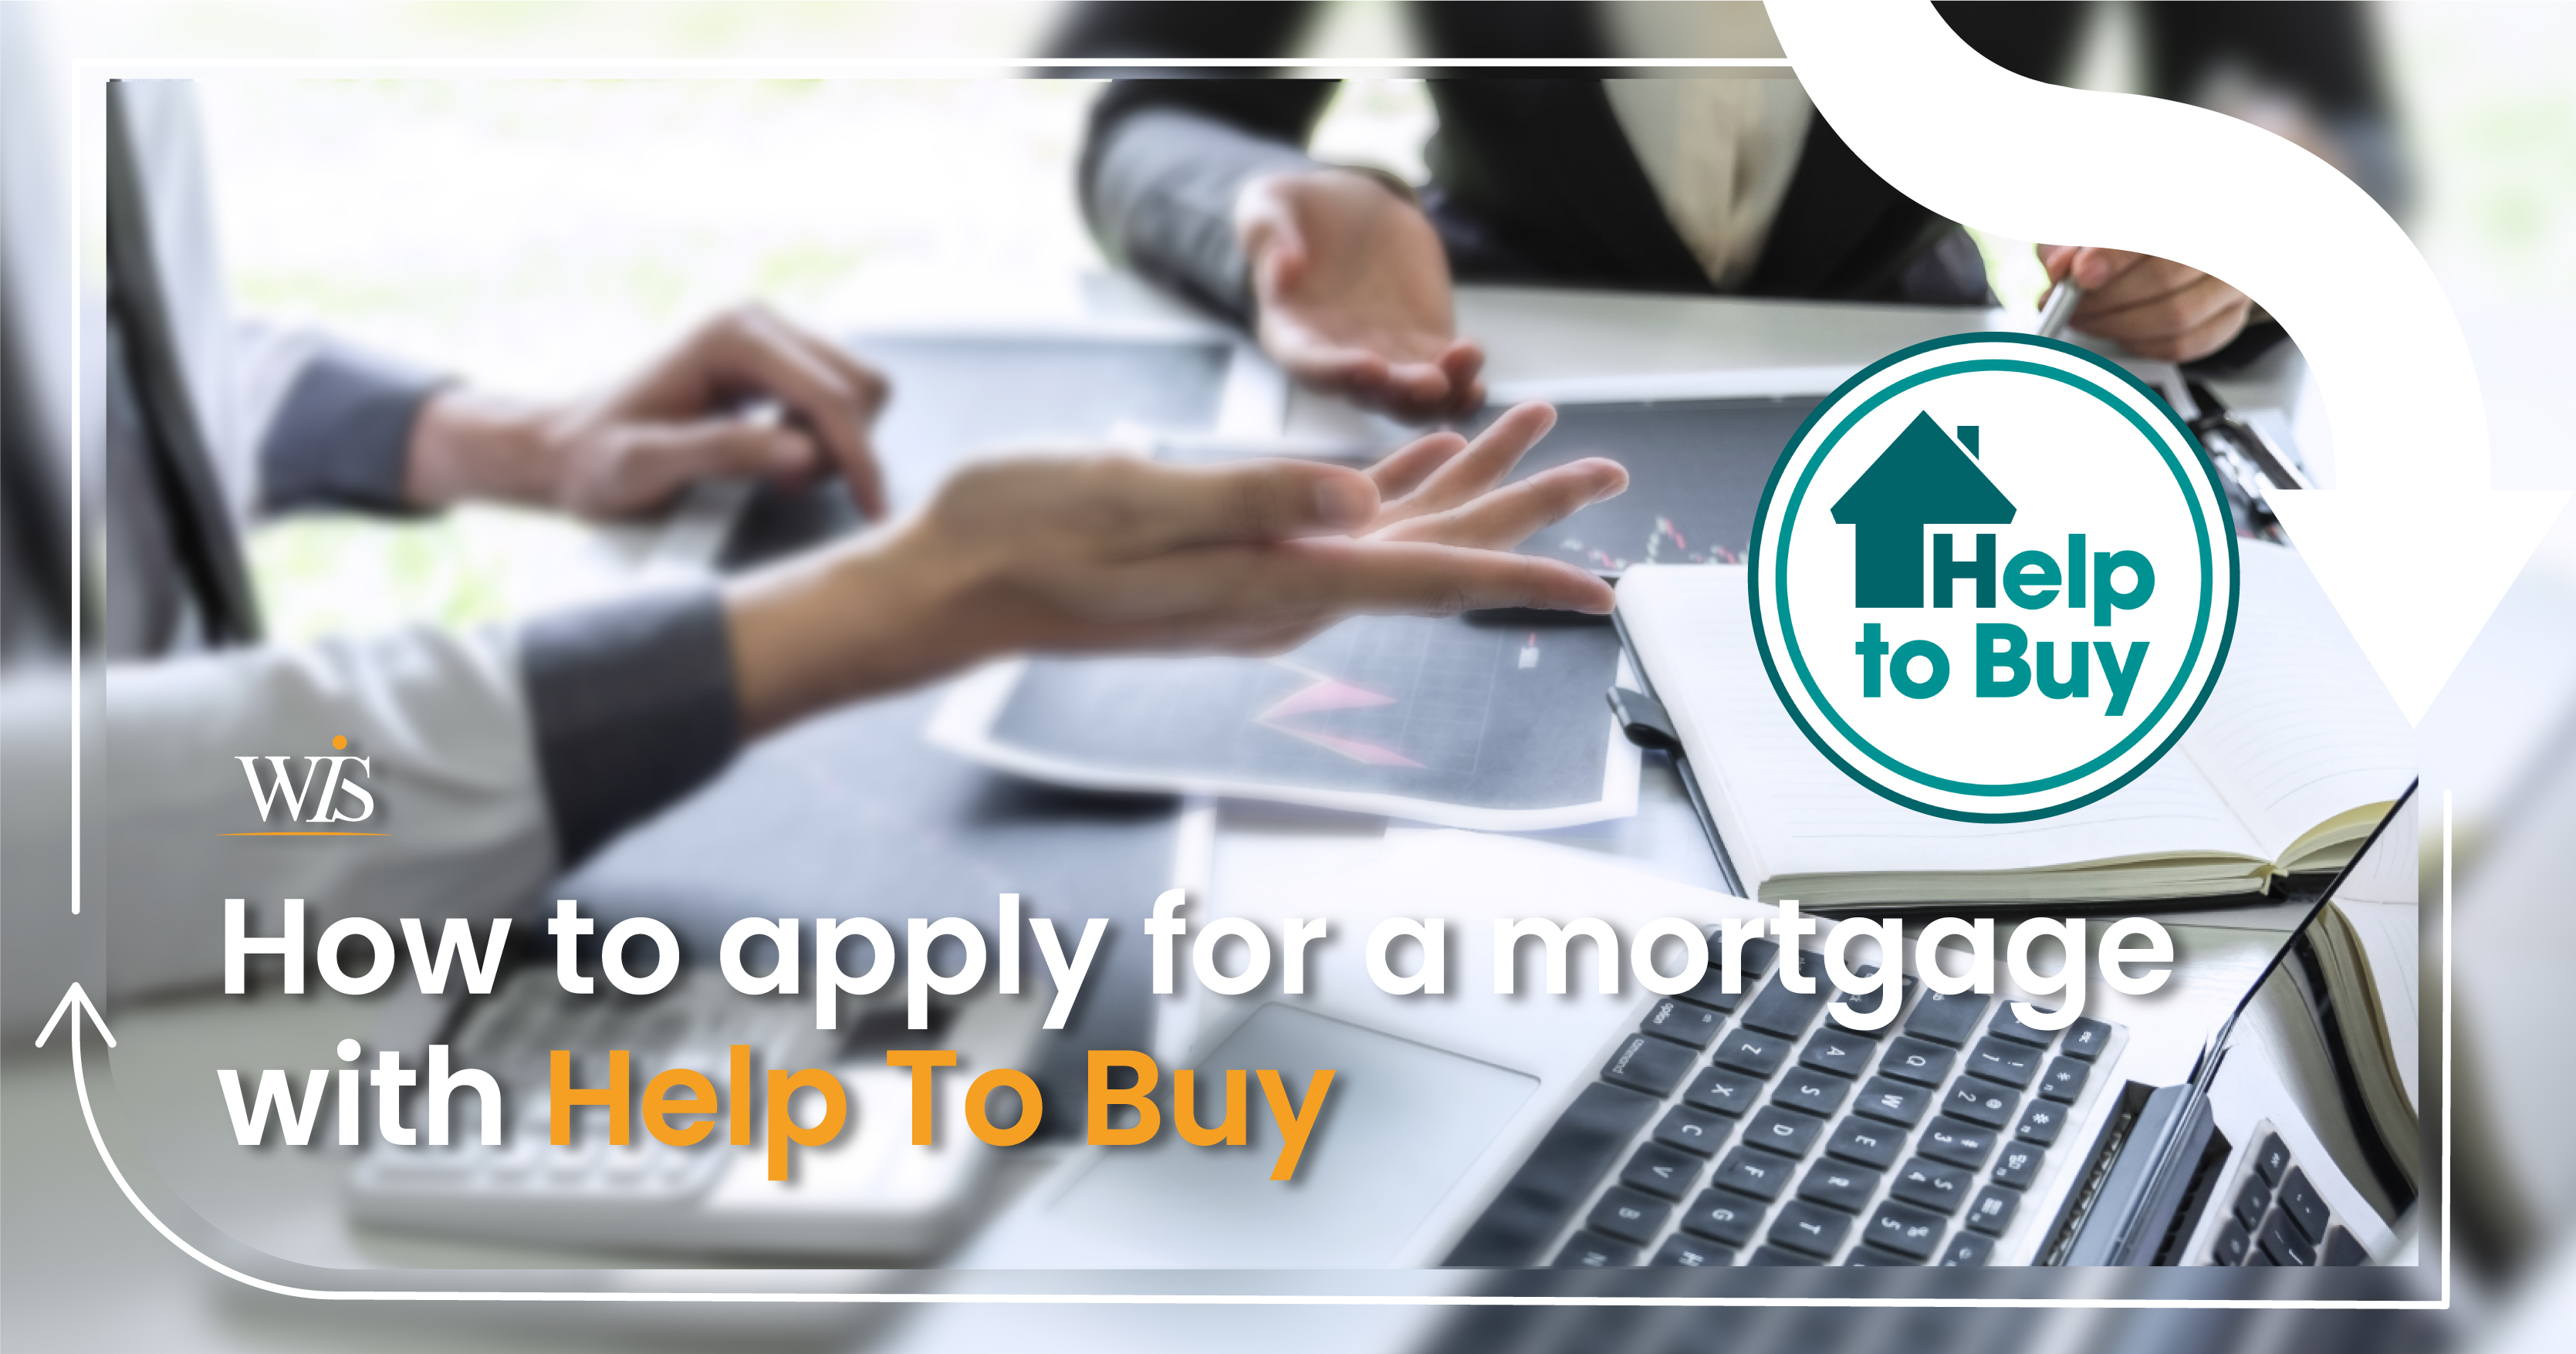 How to apply for a mortgage with help to buy image